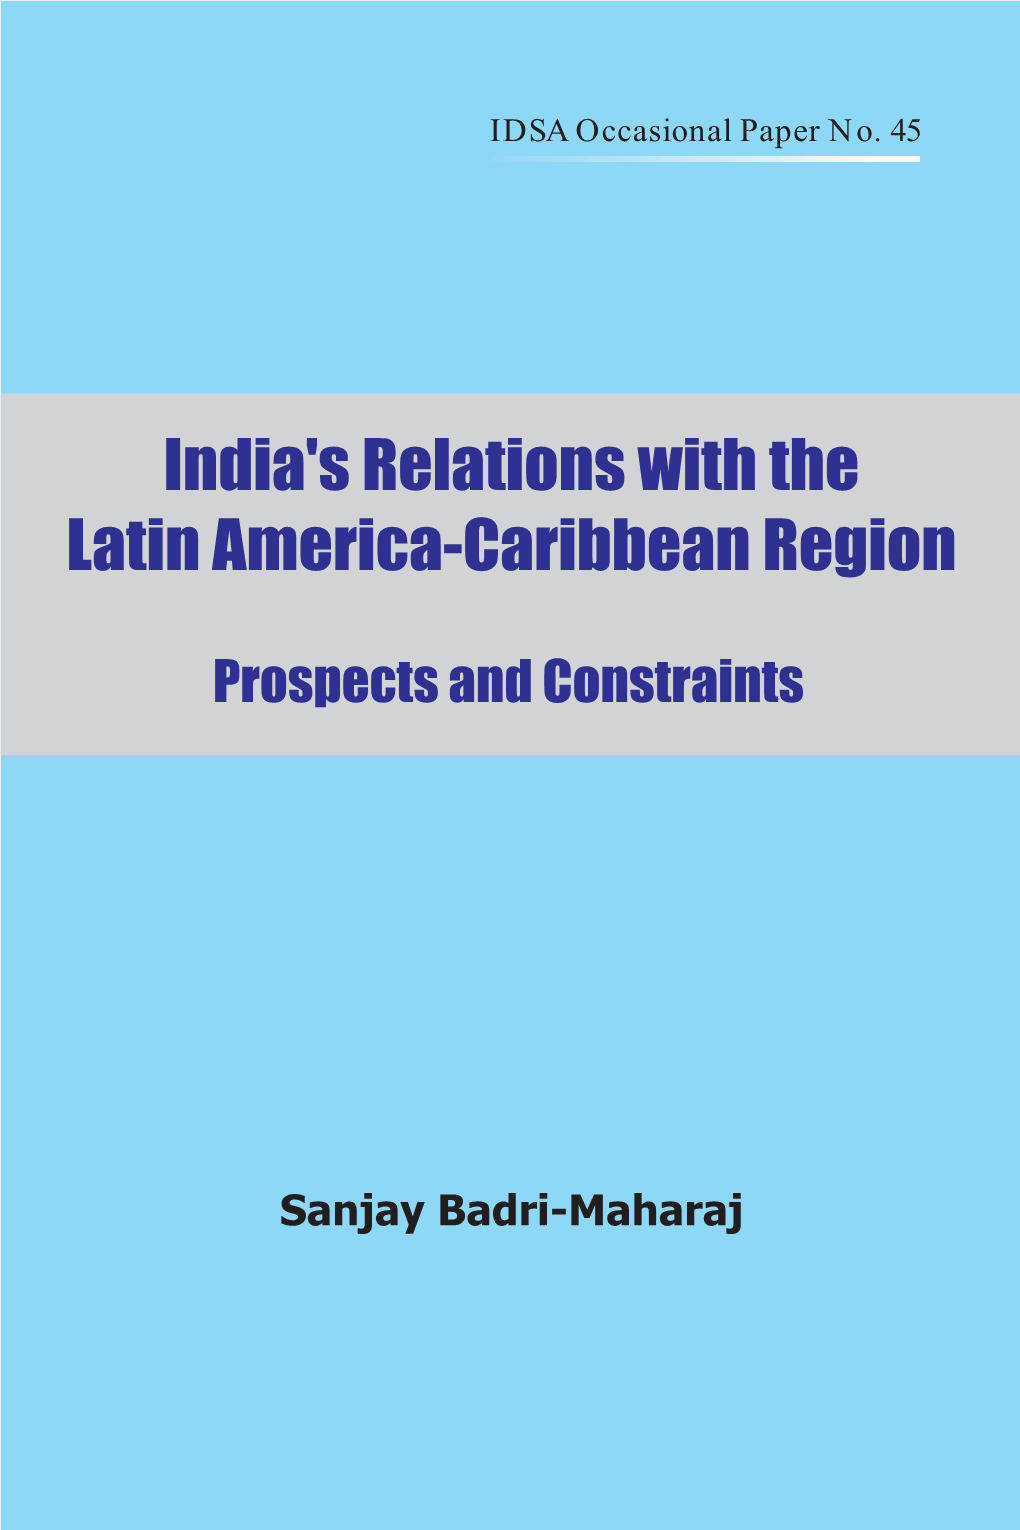 India's Relations with the Latin America-Caribbean Region